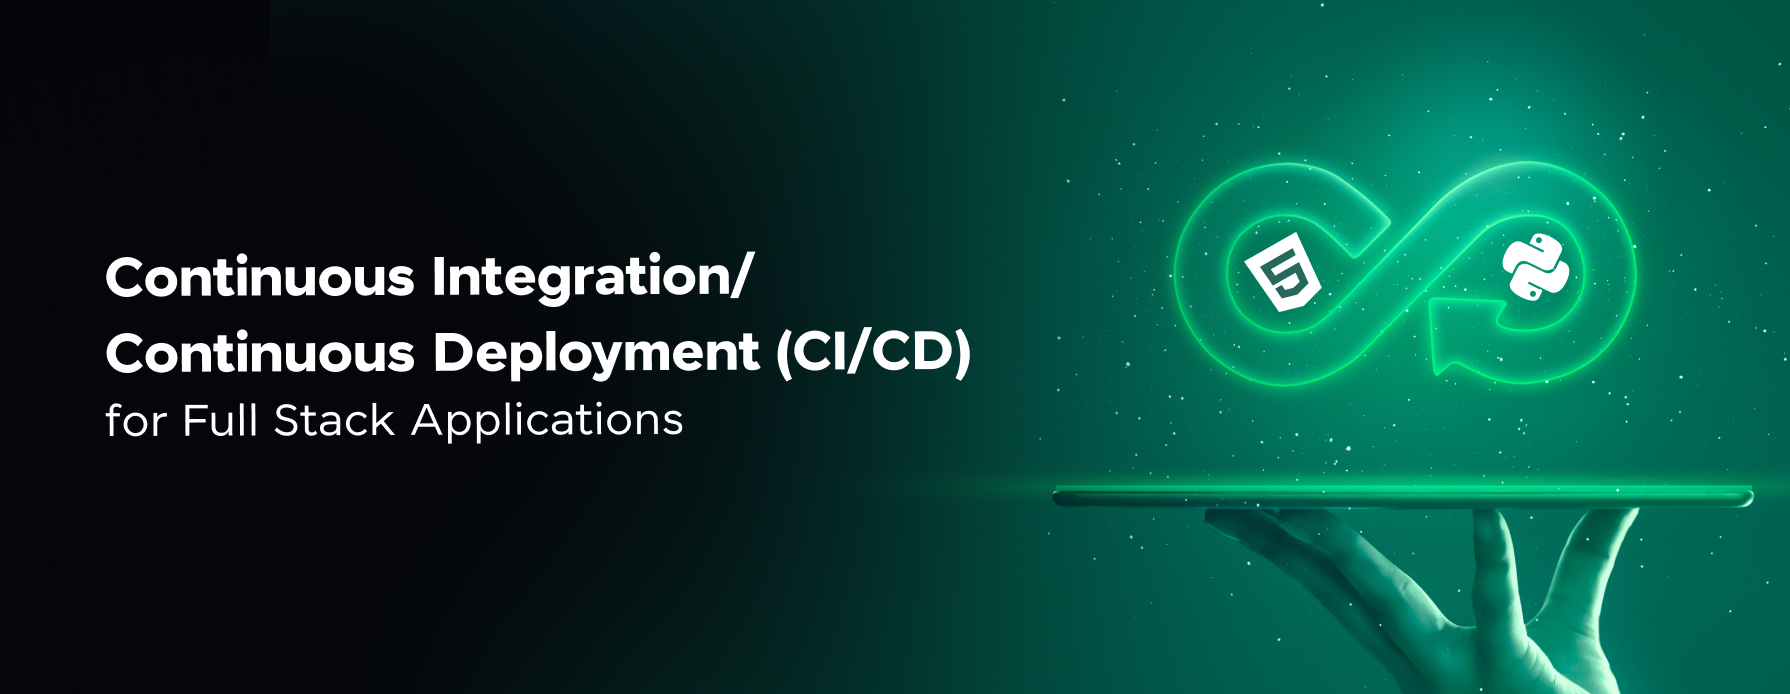 Continuous Integration and Continuous Deployment (CI/CD) for Full Stack Applications